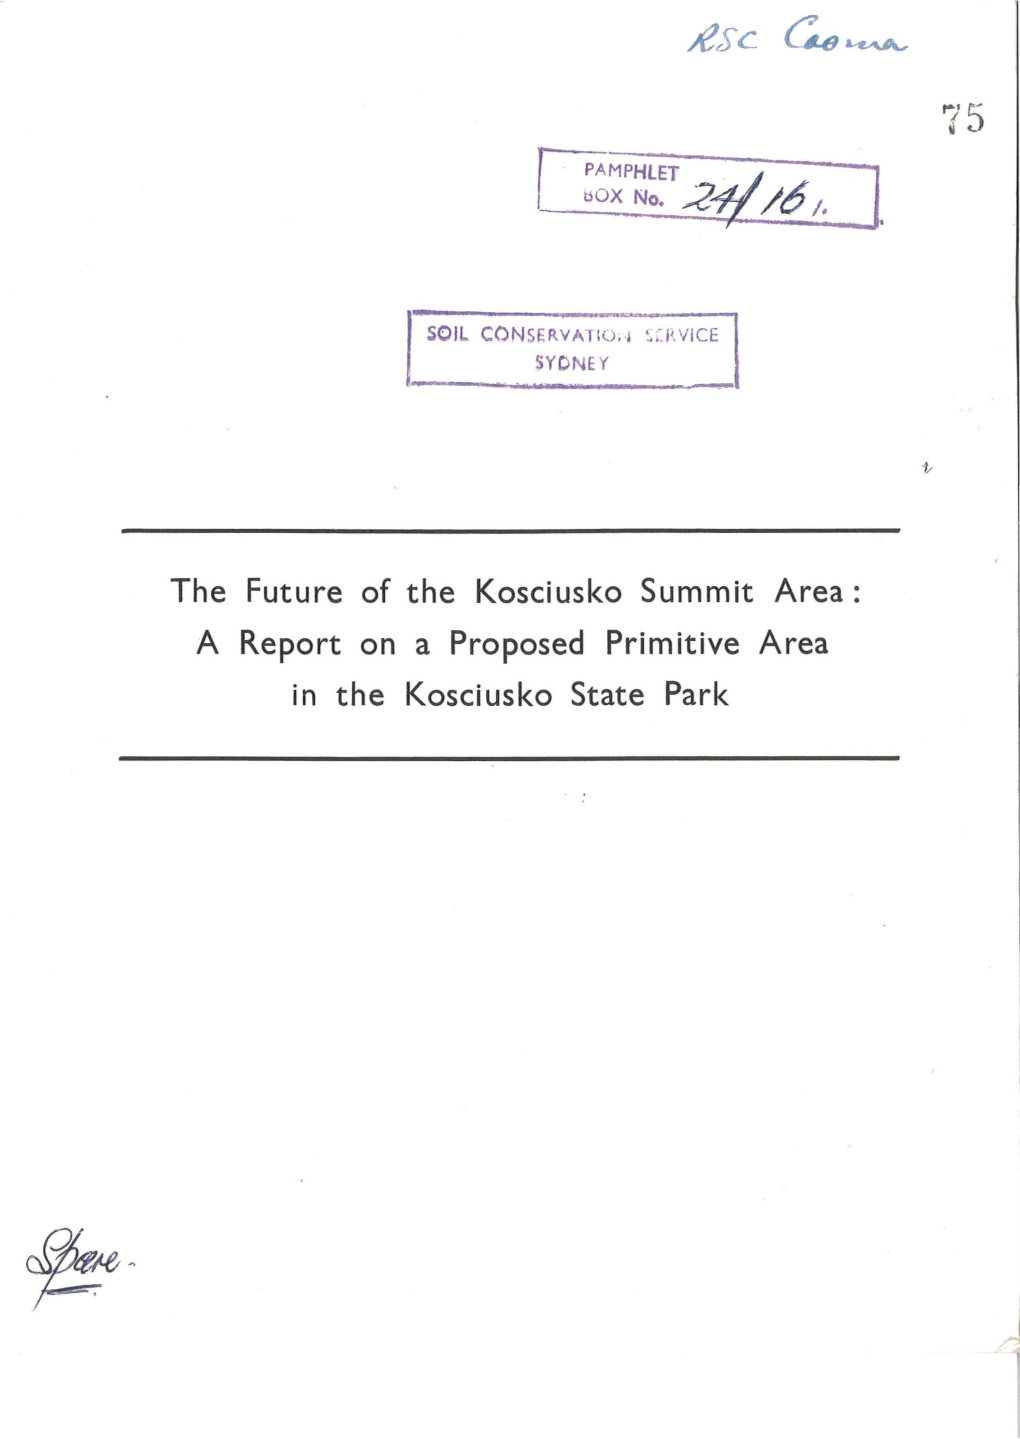 The Future of the Kosciusko Summit Area: a Report on a Proposed Primitive Area in the Kosciusko State Park Reprinted from the Australian Journal of Science, Vol